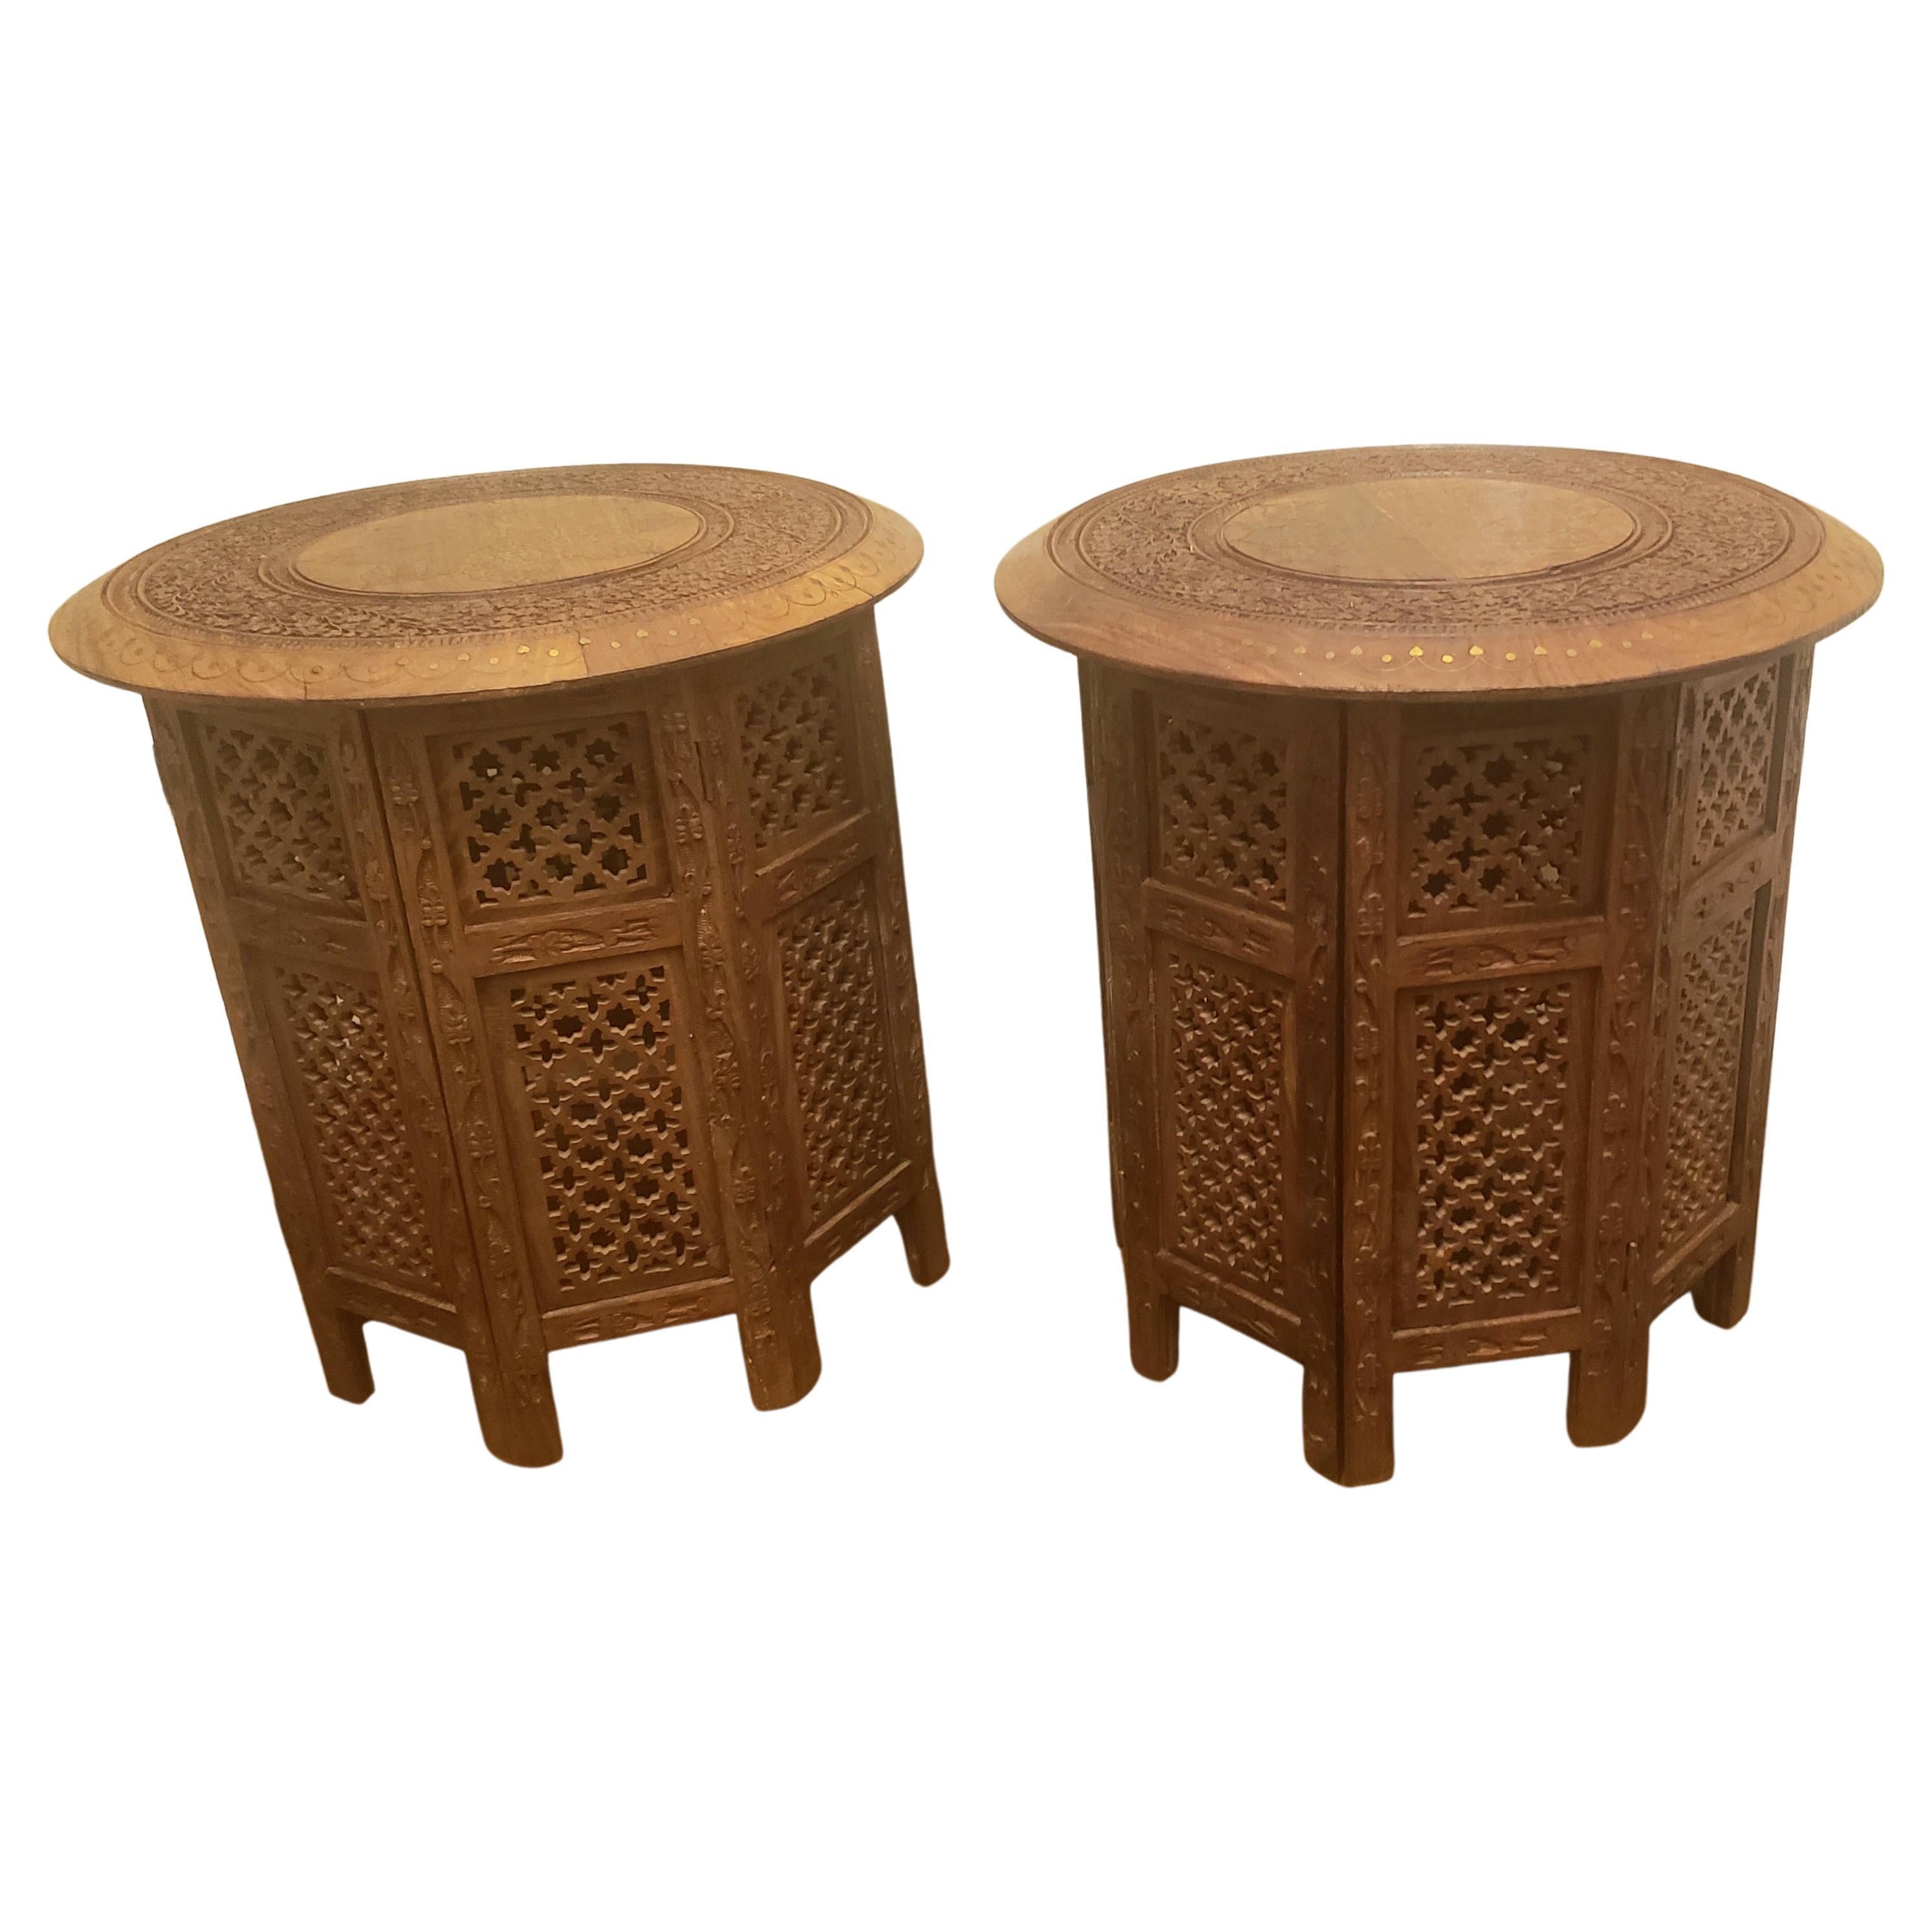 1950s Anglo-Indian Octagonal Carved Teak Collapsible Side Table with Brass Inlay For Sale